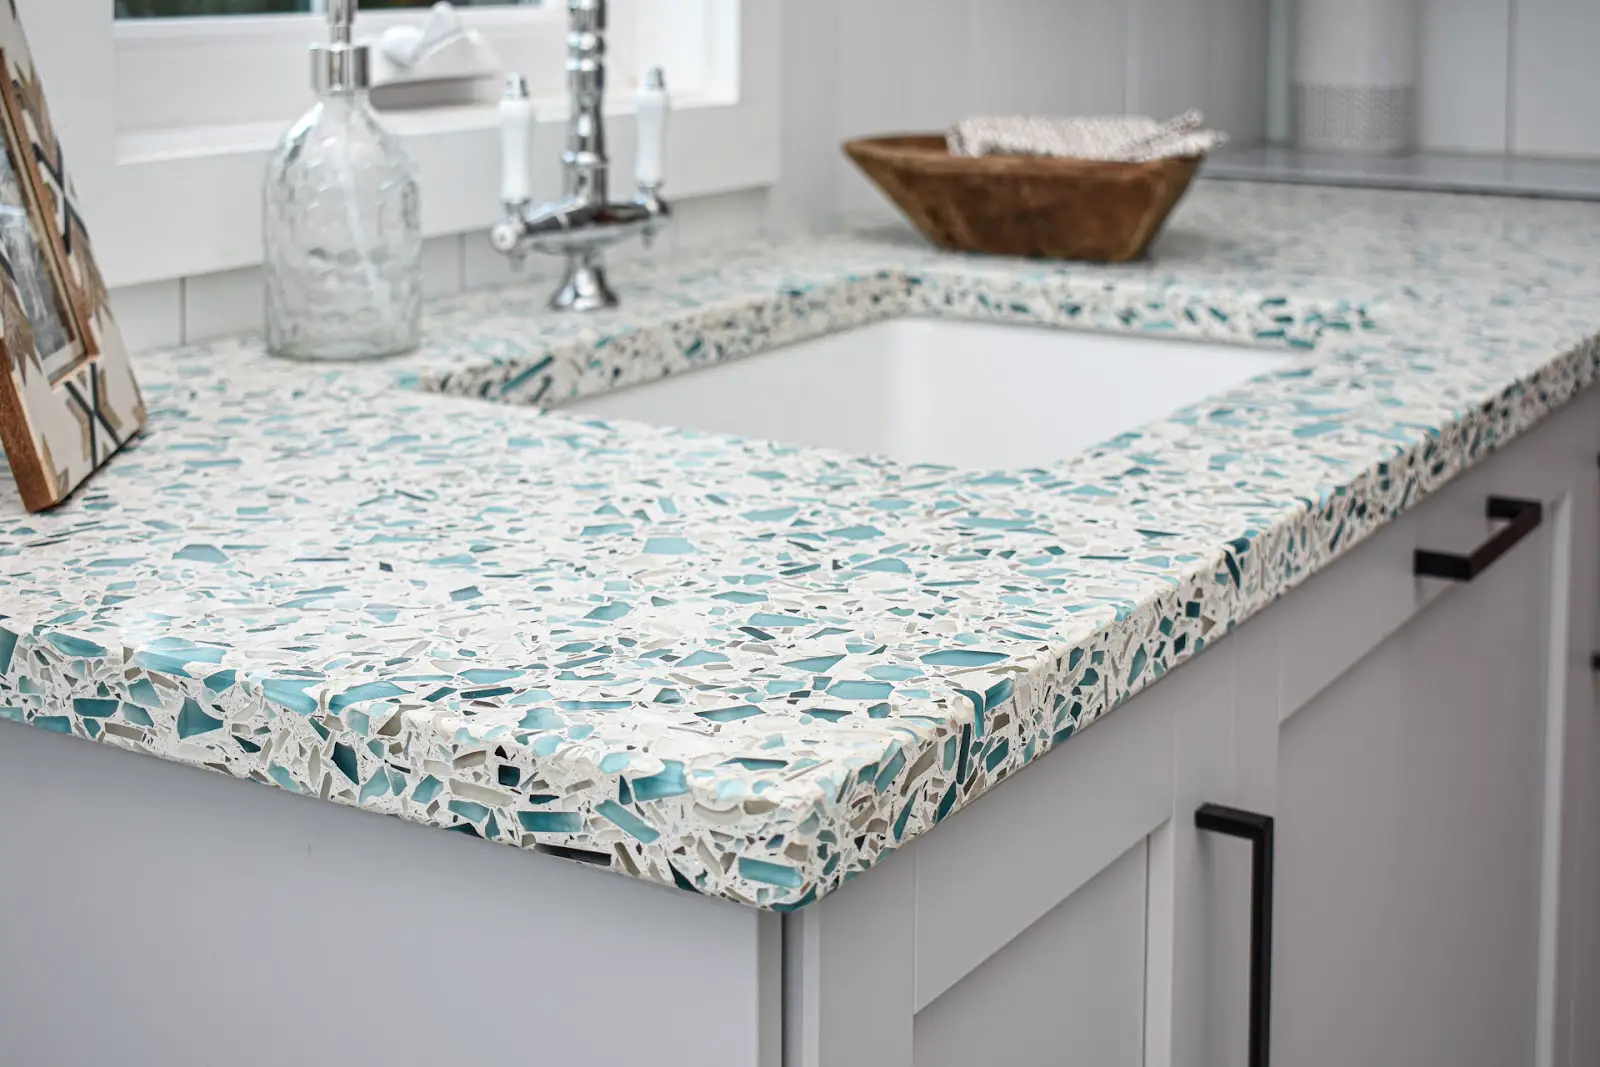 White Countertops Made From Recycled Glass